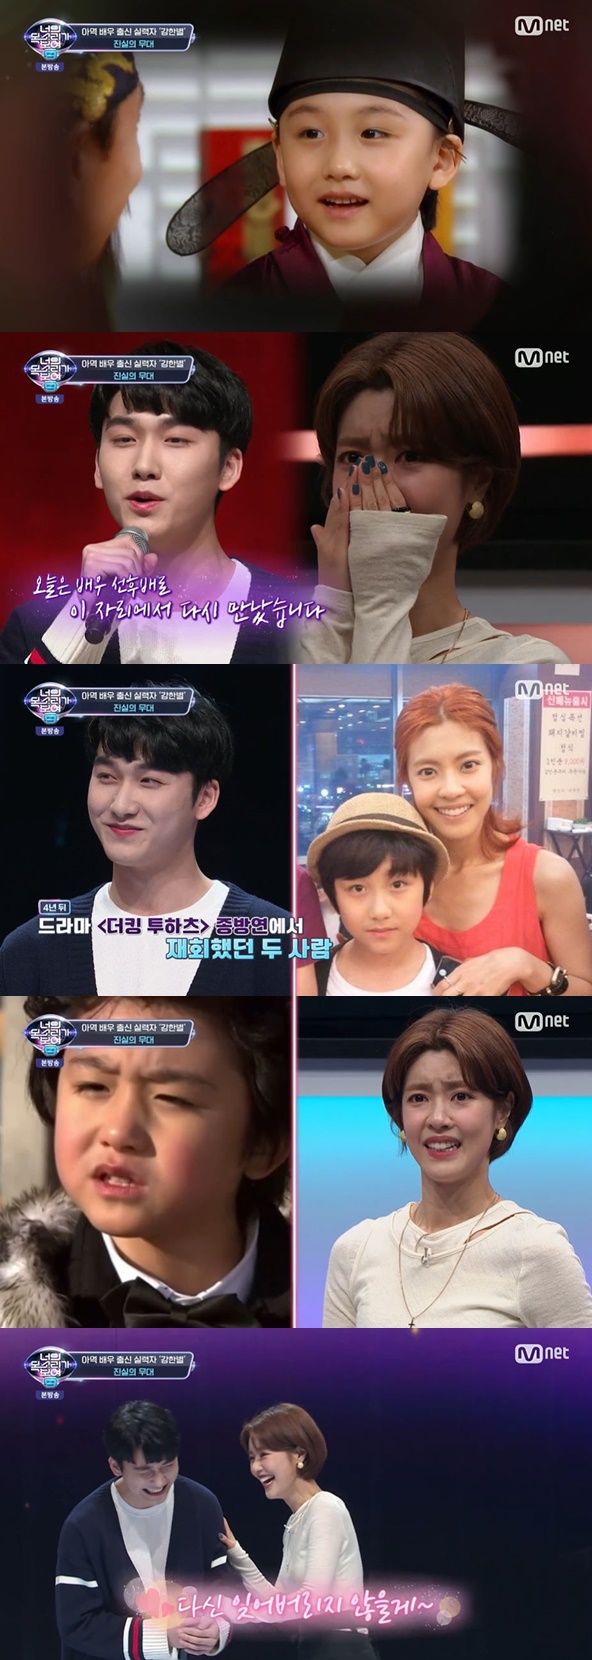 Trot singers Park Hyun-bin and Actor Lee Yoon-ji appeared on Mnet entertainment program I see your voice 9 (hereinafter referred to as You Mokbo 9) which aired on 19th.Lee Yoon-ji said, My mother and Hyun Bins mother are biological sisters, Park Hyun-bin and Lee Jong-sam.Park Hyun-bin expressed confidence that he could find a sound well. Lee Yoon-ji said, My brother said, I can fit even if I look at a clown.You can see it even if you do not sing, Park Hyun-bin said. Eyes, lips, ear shape, clown size and oral structure are important.Eun Ji-won asked, Are you a plastic surgeon?So, the year warned, There are a lot of people who are in the beginning, and Yoo Se-yoon said, We are already happy.Lee Yoon-ji, who saw the lip sync of the second singer Skills from Actor who came to her mother, said, If you look at the breathing method, it seems that you are right to postpone.Have you ever played a mother?Lee Yoon-ji said, I did a lot of things, but I do not think it is our son.Identity of the No.2 singer turned out to be Skills; Lee Yoon-ji wept as he appeared on the screen in the drama The Great King Sejong.In fact, he played the role of Lee Yoon-jis son in The Great King Sejong. Lee Yoon-ji could not hide his sorryness, saying, I did two works with me.Kang, who is resting for his studies, surprised everyone by saying, I acted as a child of Koo Jun-pyo in the drama Boys over Flowers.Lee Yoon-ji, who is next to Kang Han-byeol, said, I would like to see if my son is big, and I will wait for the day I meet in another work. I will not forget it again.Im sorry for my mom, he added, drawing laughter.Lee Yoon-ji said, What have I done from the beginning? And said, Brother, what happened. Park Hyun-bin and the production team were resentful and laughed.Photo = Mnet Broadcasting Screen